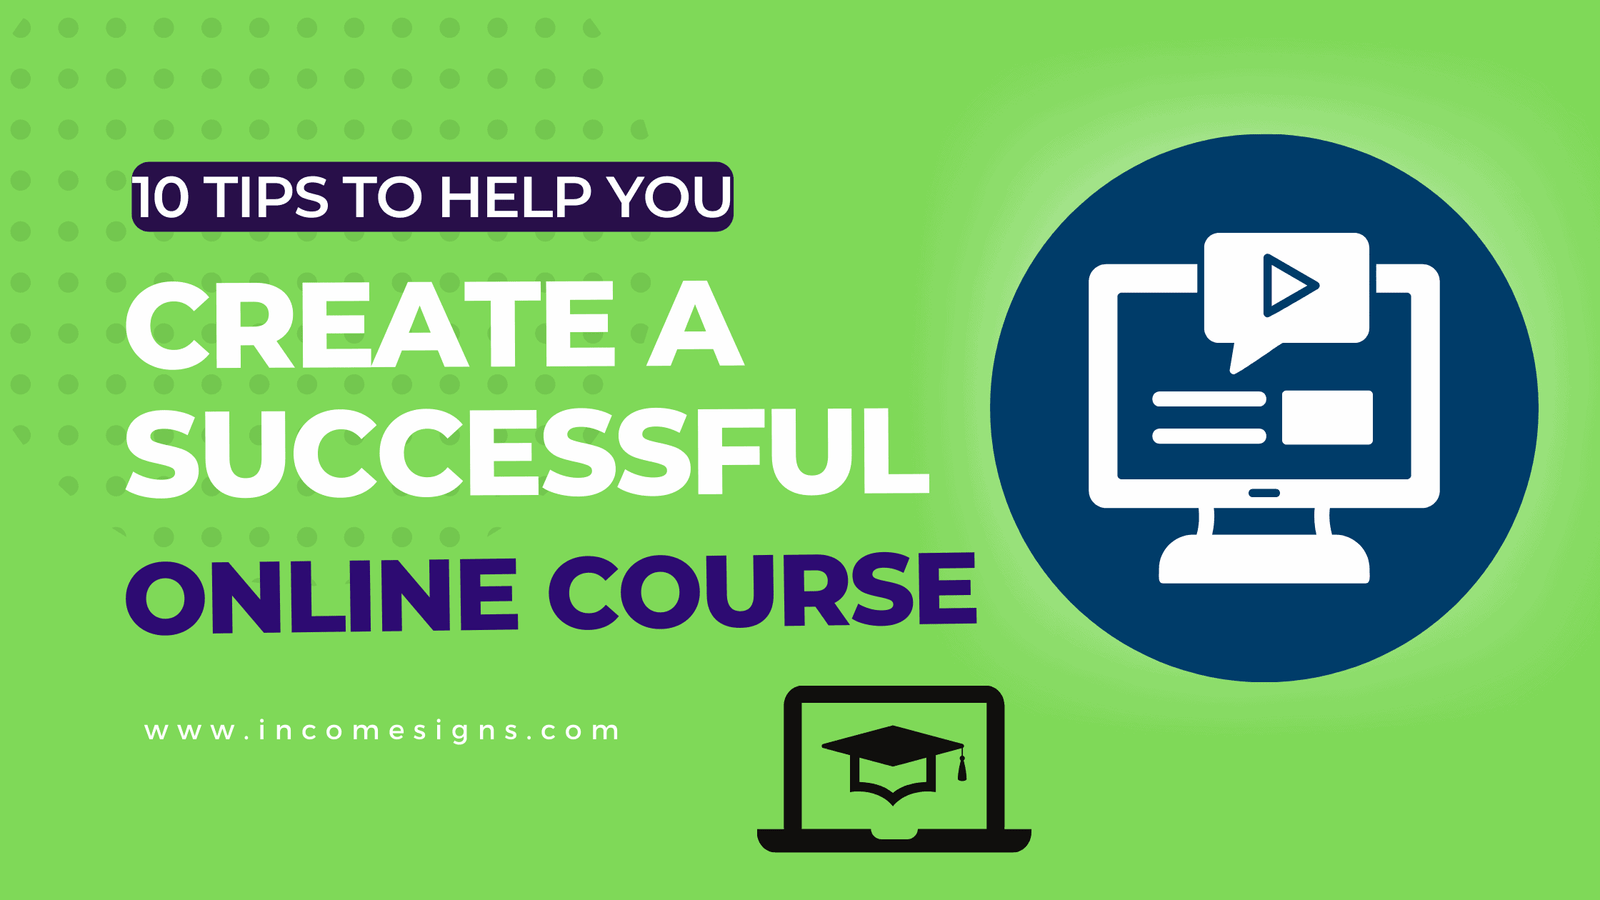 10 Tips to Help You Create a Successful Online Course (Income Signs)